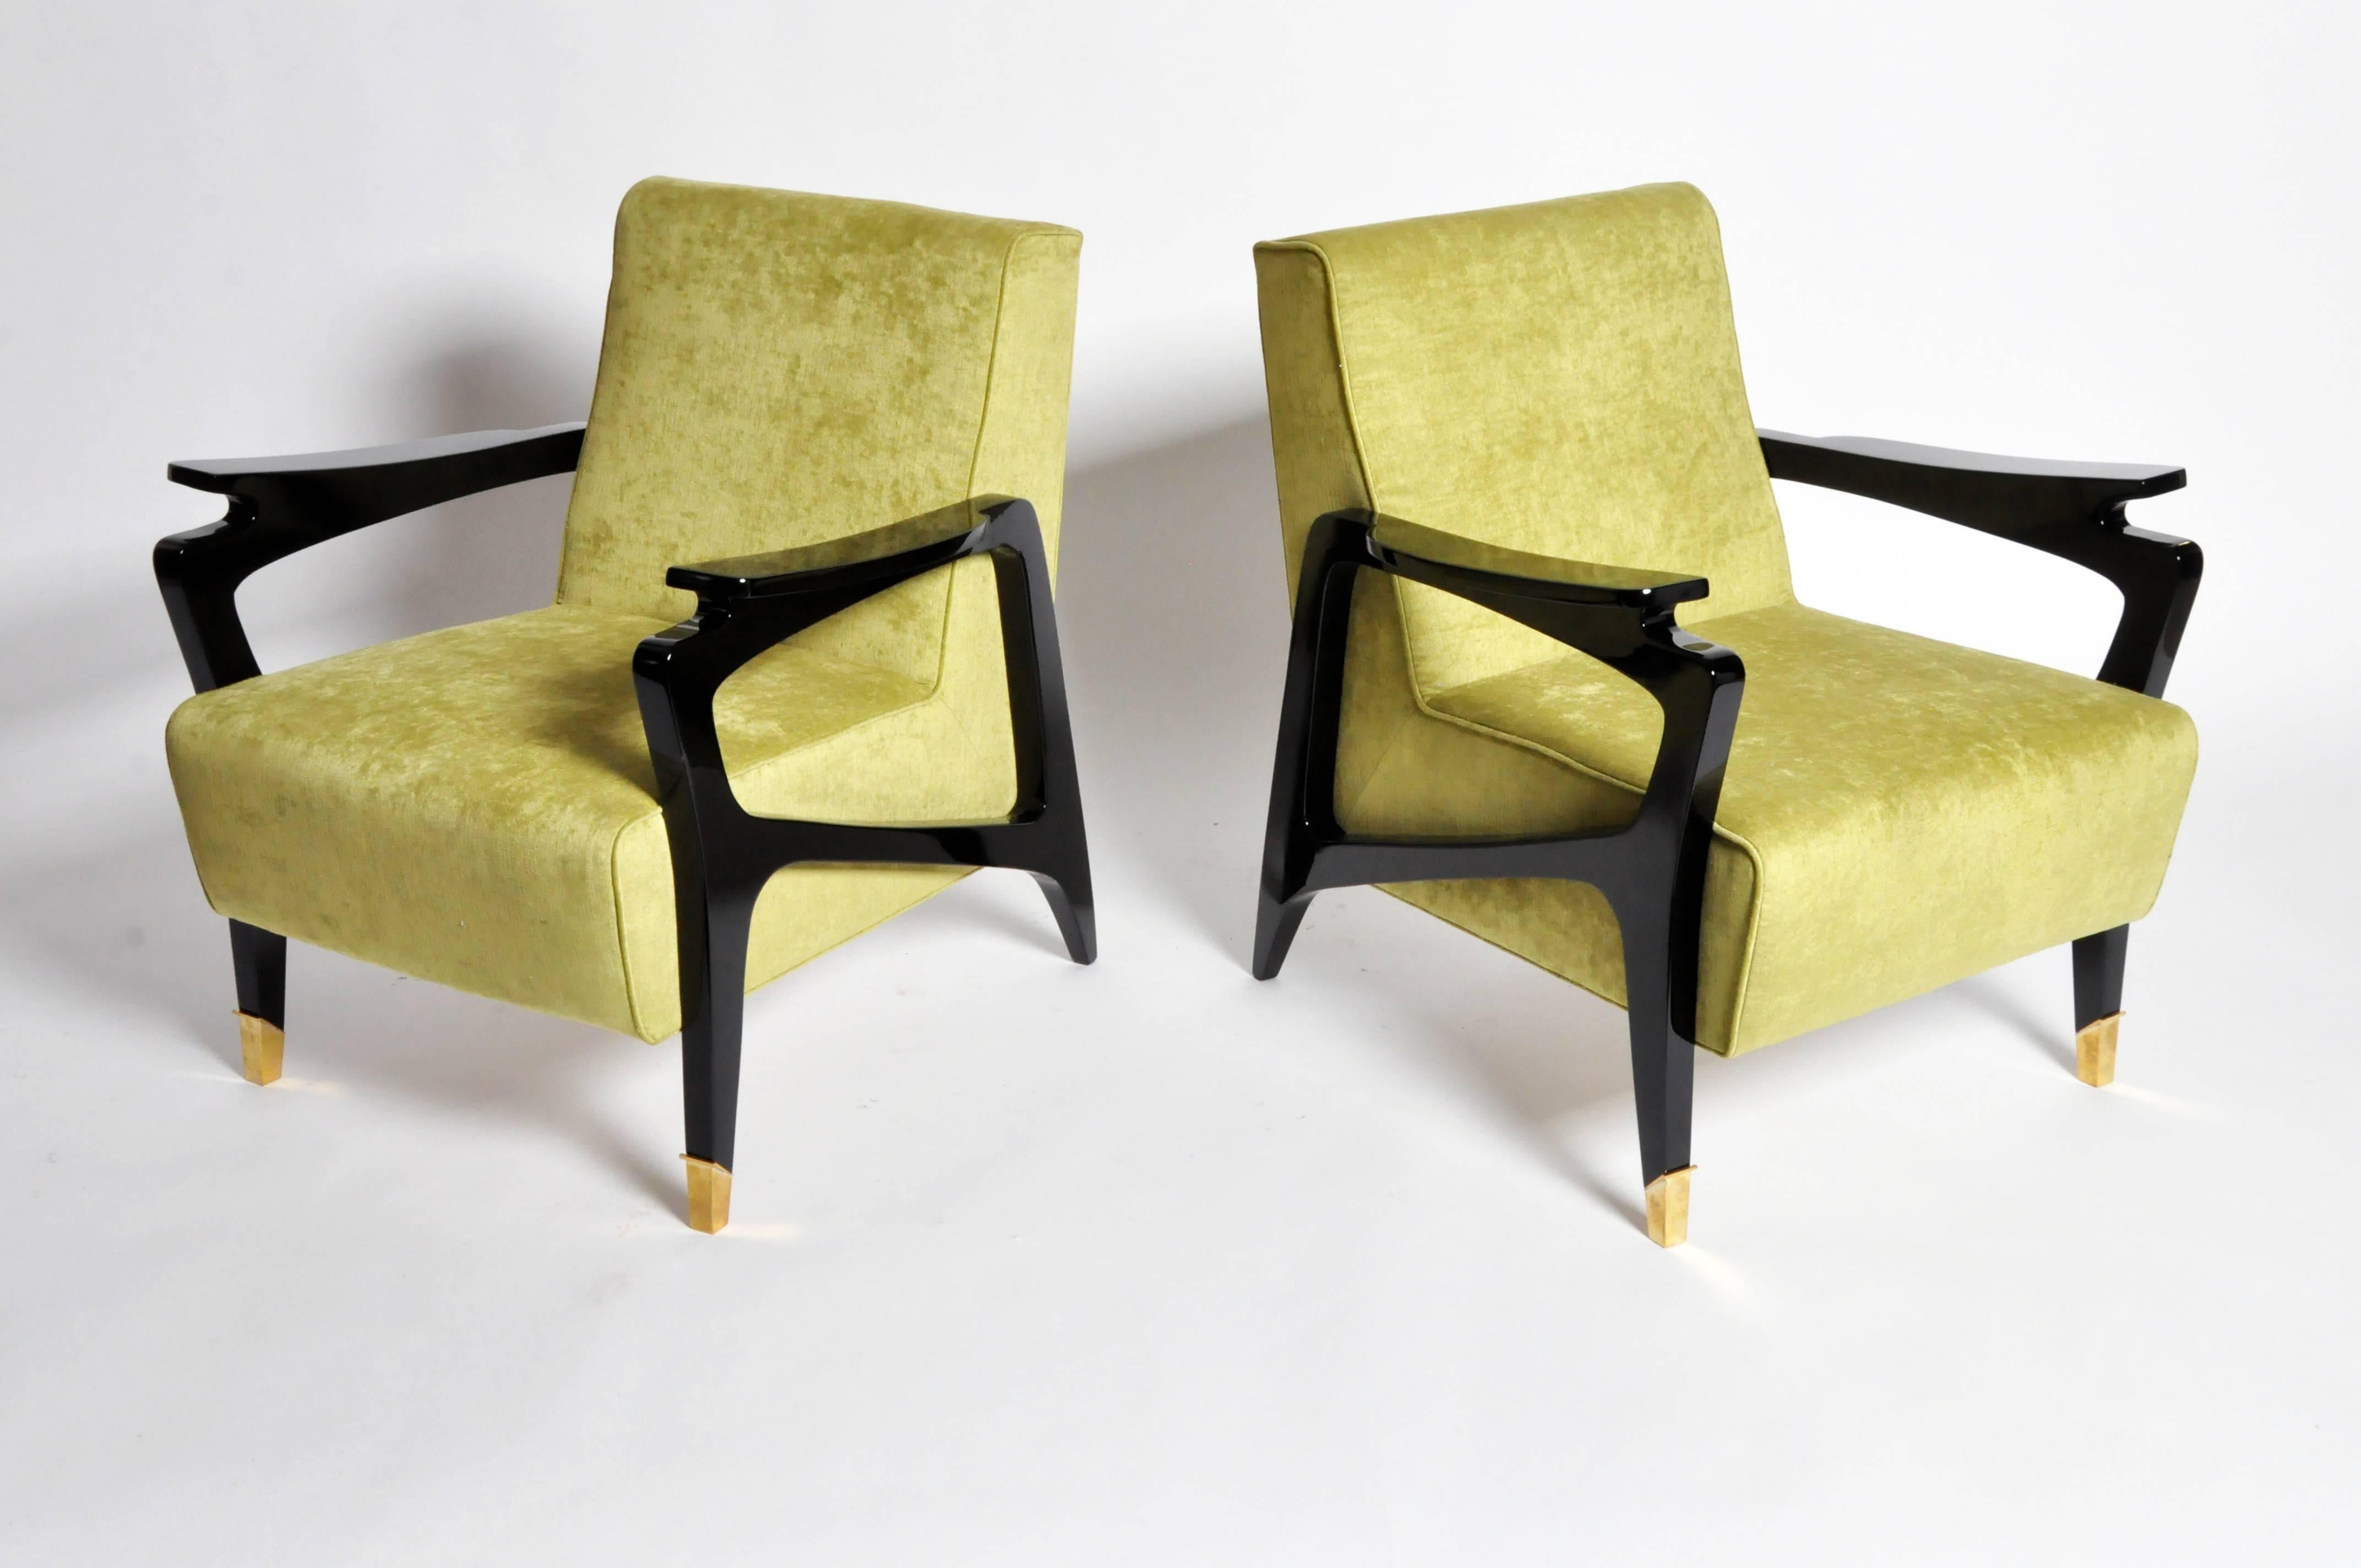 Impressive Pair of Raphael-Style Chairs.  A beautiful combination of sleek, sculptural elements and bold, modernist design are what make these pieces sing.  Arms are finished in a pristinely polished, black walnut veneer.  Ample pillows upholstered